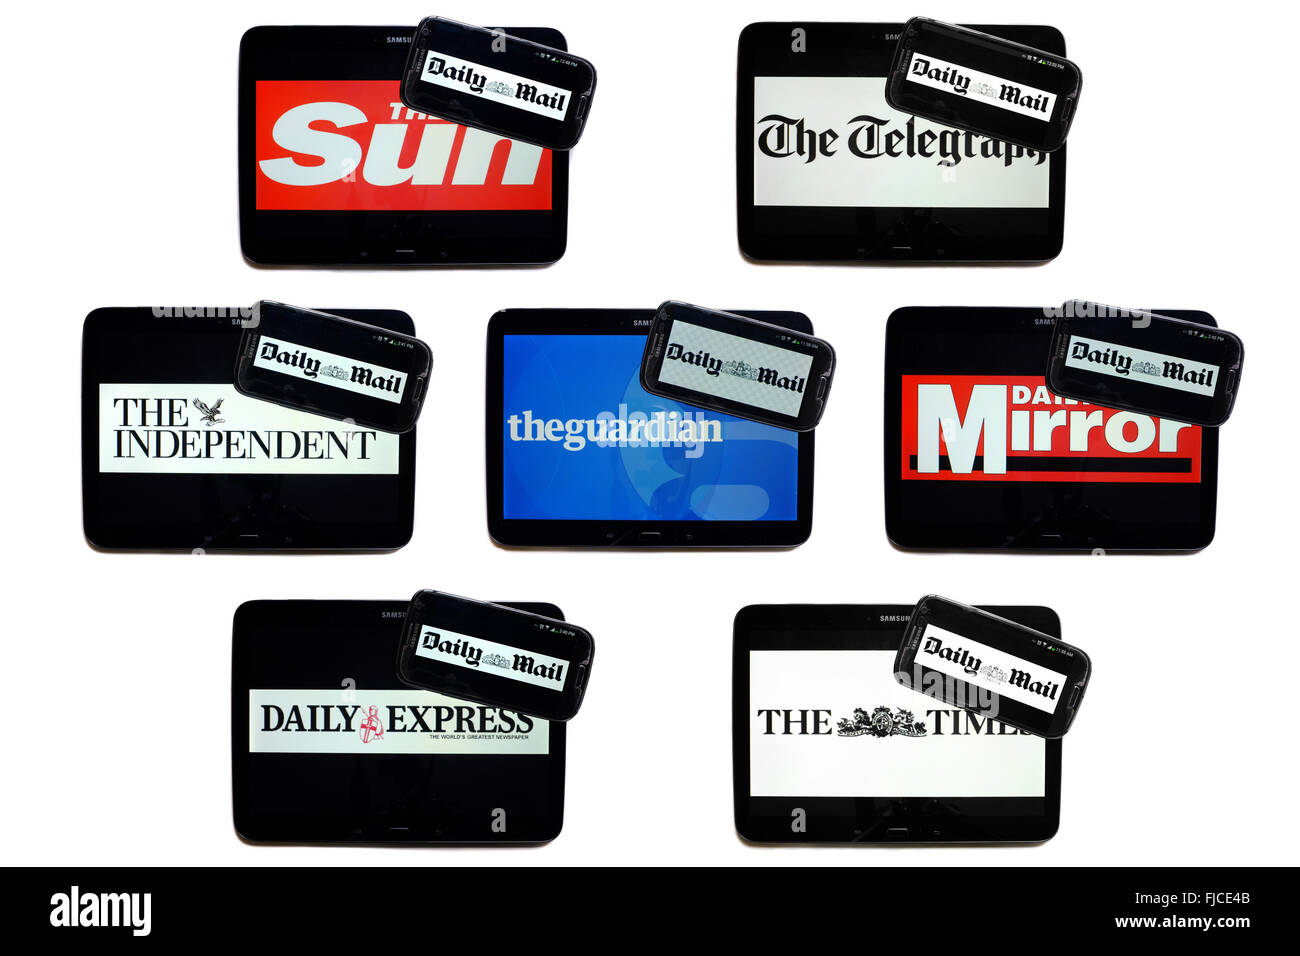 The Daily Mail newspaper logo on smartphone screens surrounded by tablets displaying the logos of rival newspapers. Stock Photo